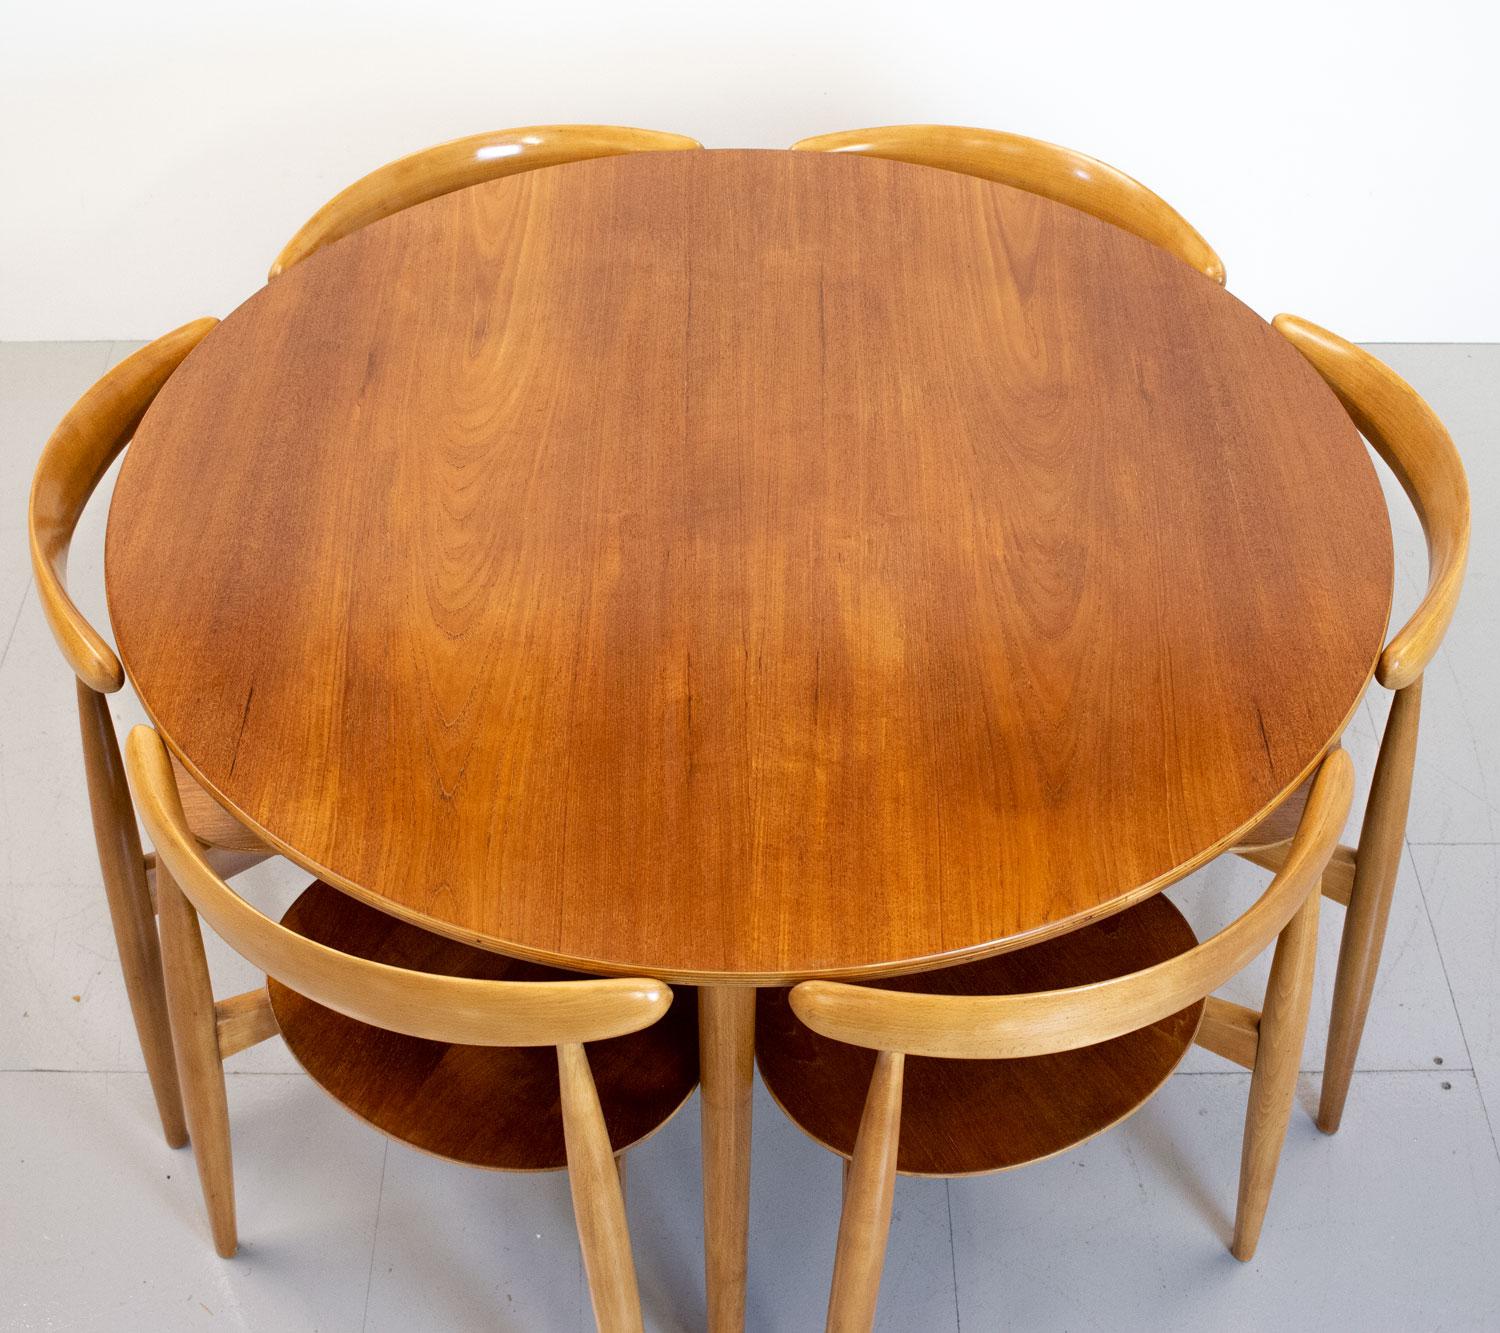 An iconic dining set comprising 6 model FH4103 Heart stacking chairs, named after the heart shape of the seat, and a model FH4602 table designed by Hans J. Wegner for Danish company Fritz Hansen in 1953. All constructed with tripod beech frames and